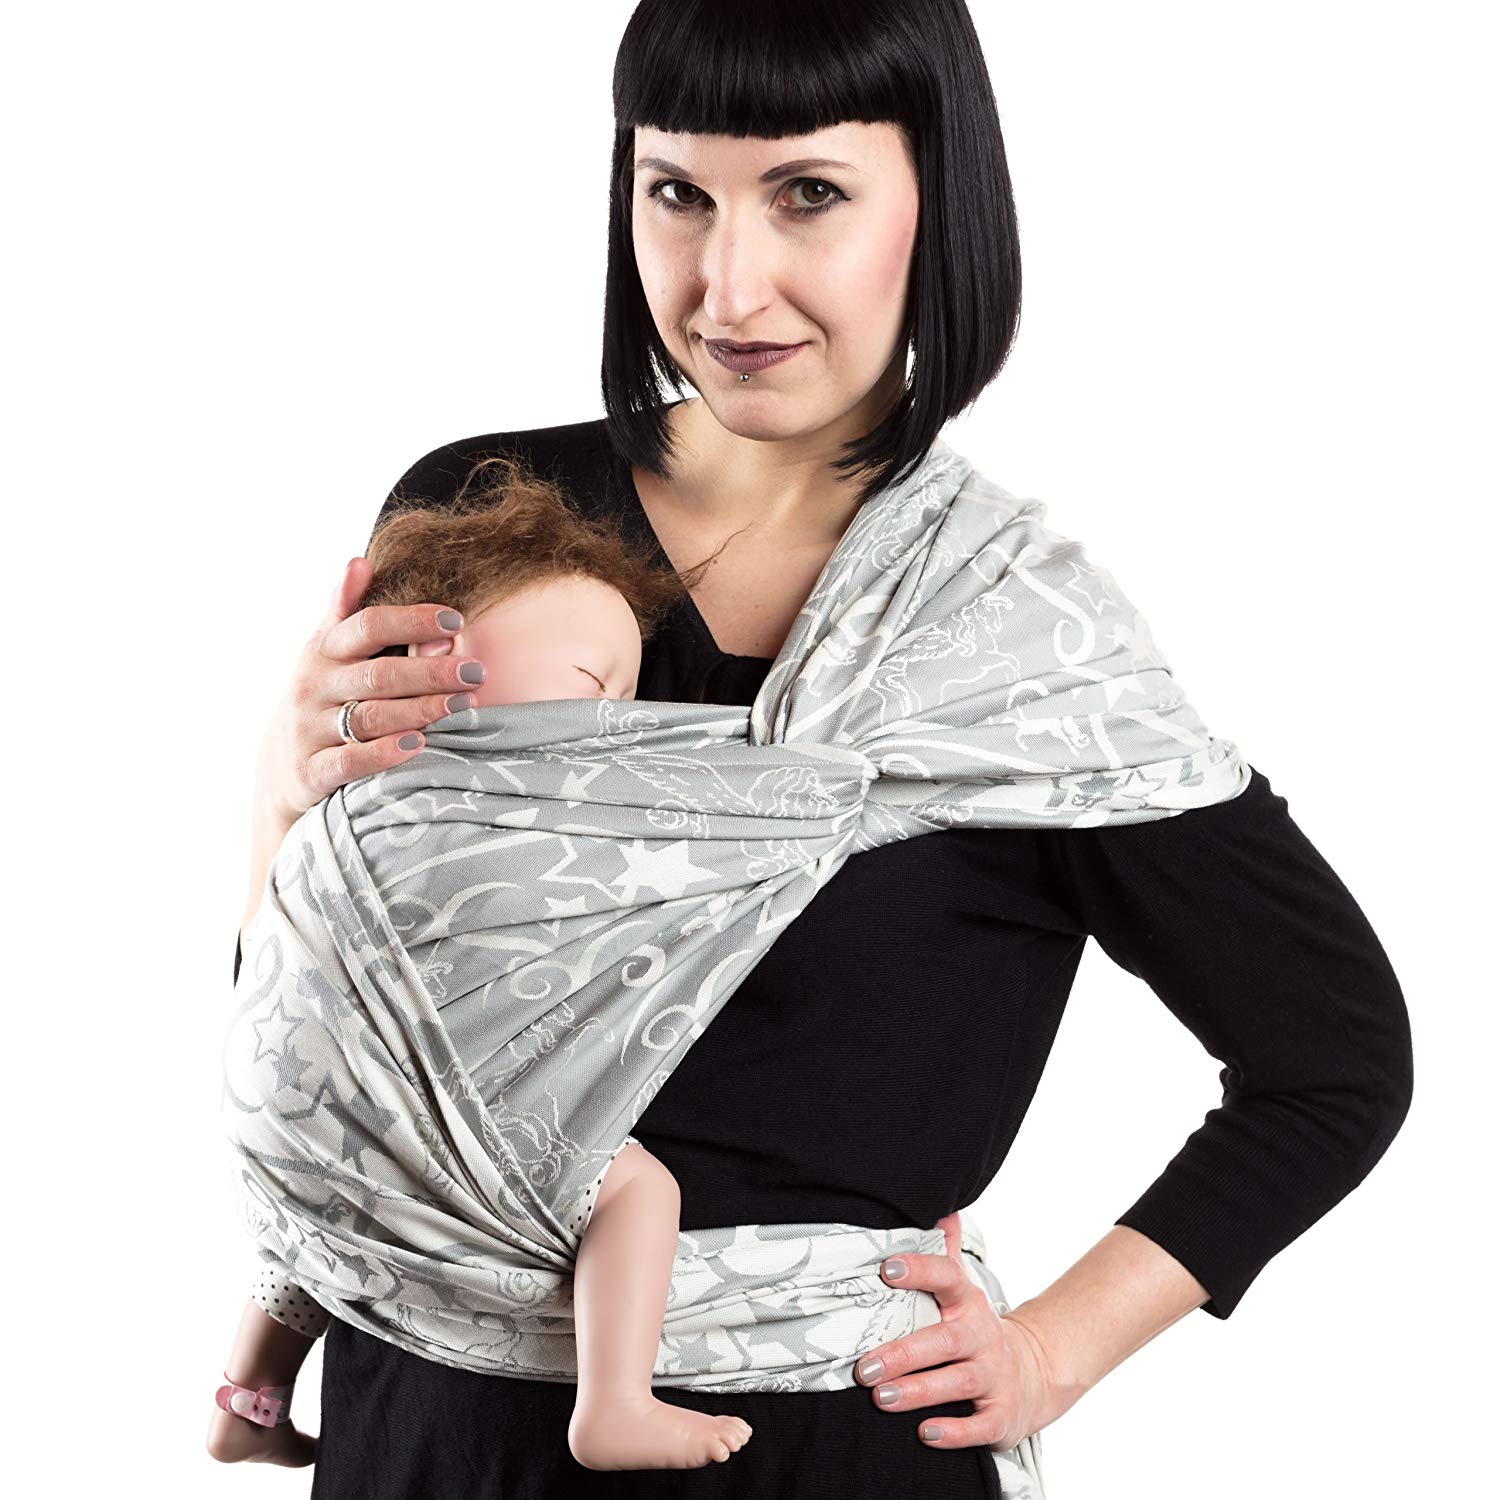 SCHMUSEWOLKE Baby Carrier Sling Jacquard Magic Grey Organic Cotton 80 x 470 cm Baby Size Toddler 9-60 Months 6-16 kg Belly and Back Carrier Cloth